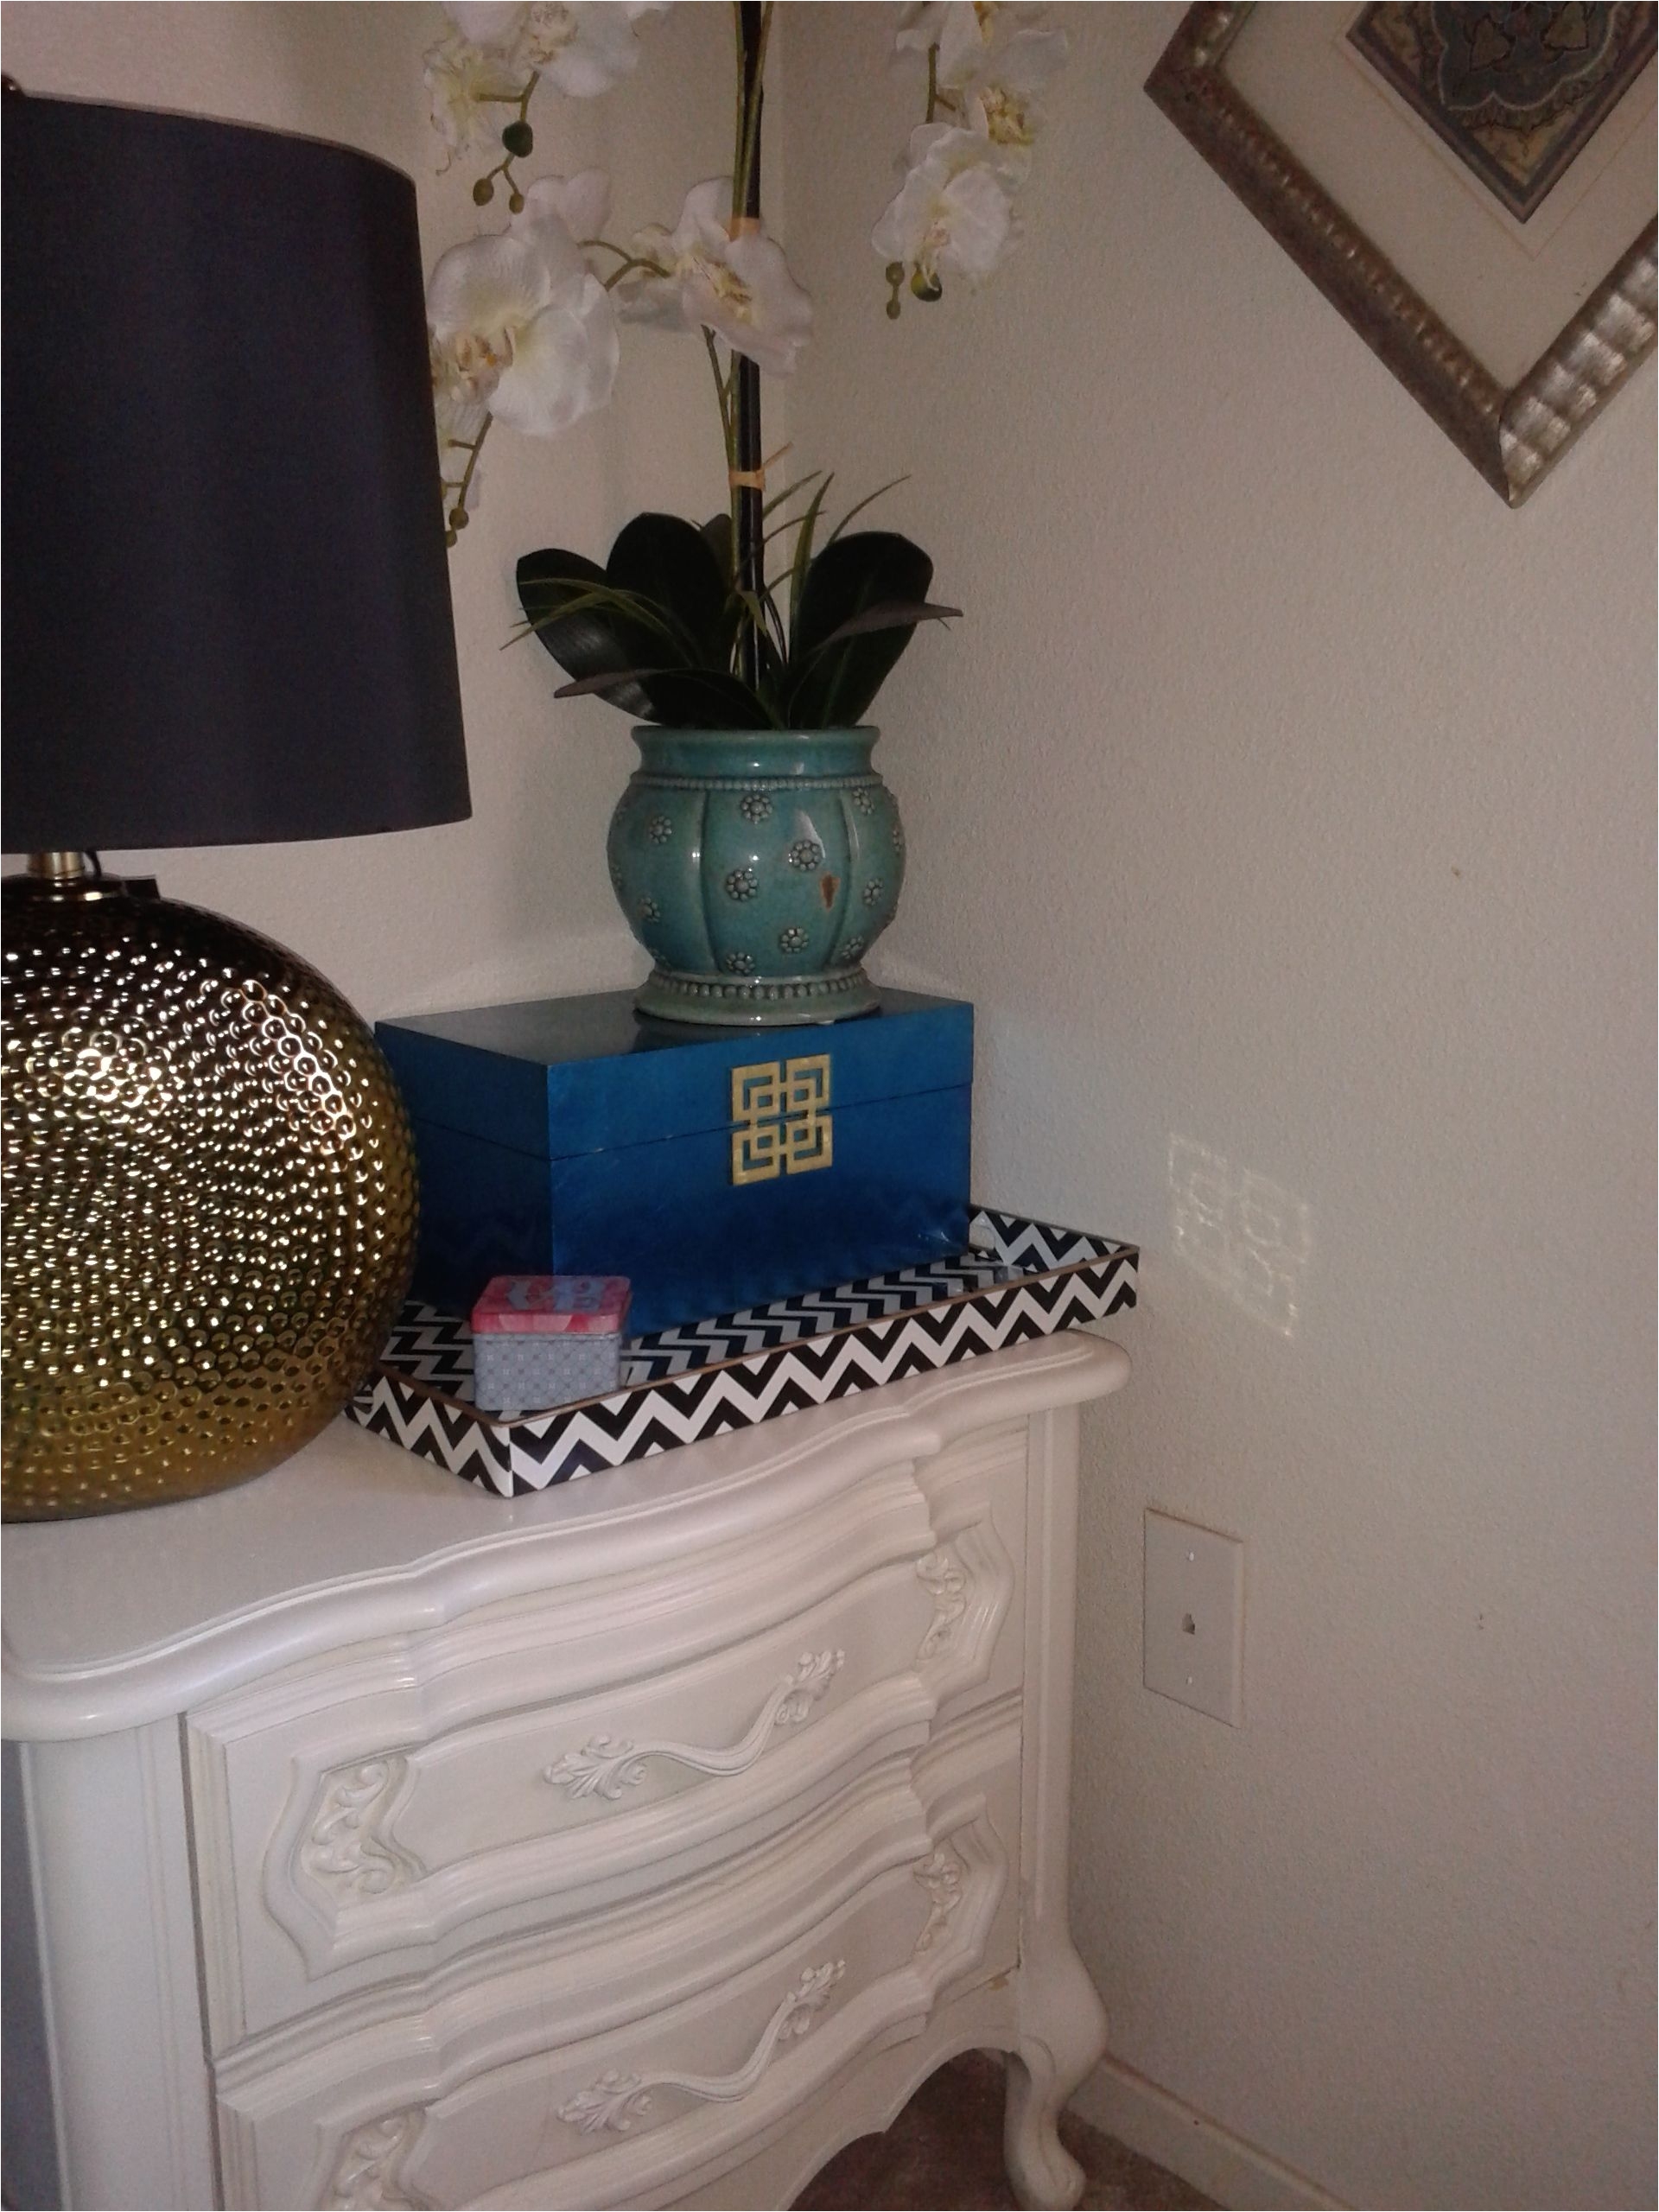 fantastic tahari home decor at home goods finds tahari lamp and turquoise chest